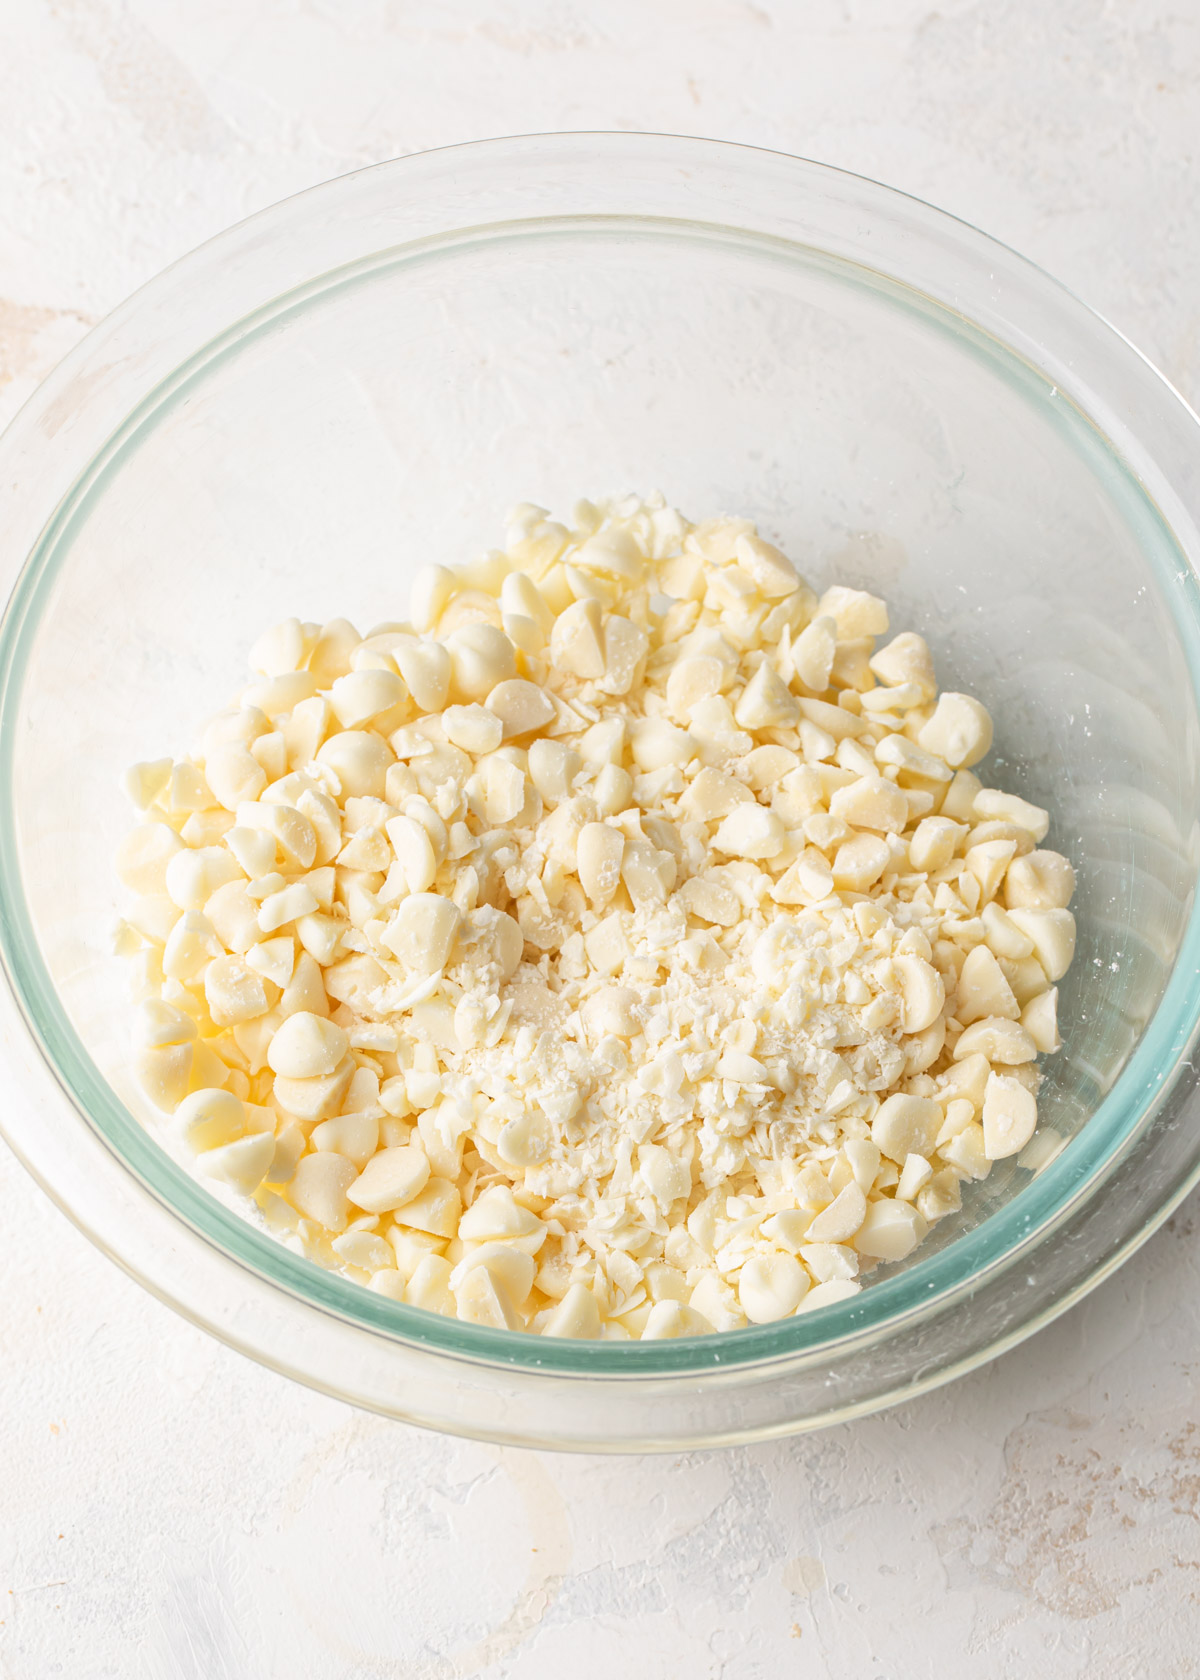 Chopped white chocolate in a glass bowl